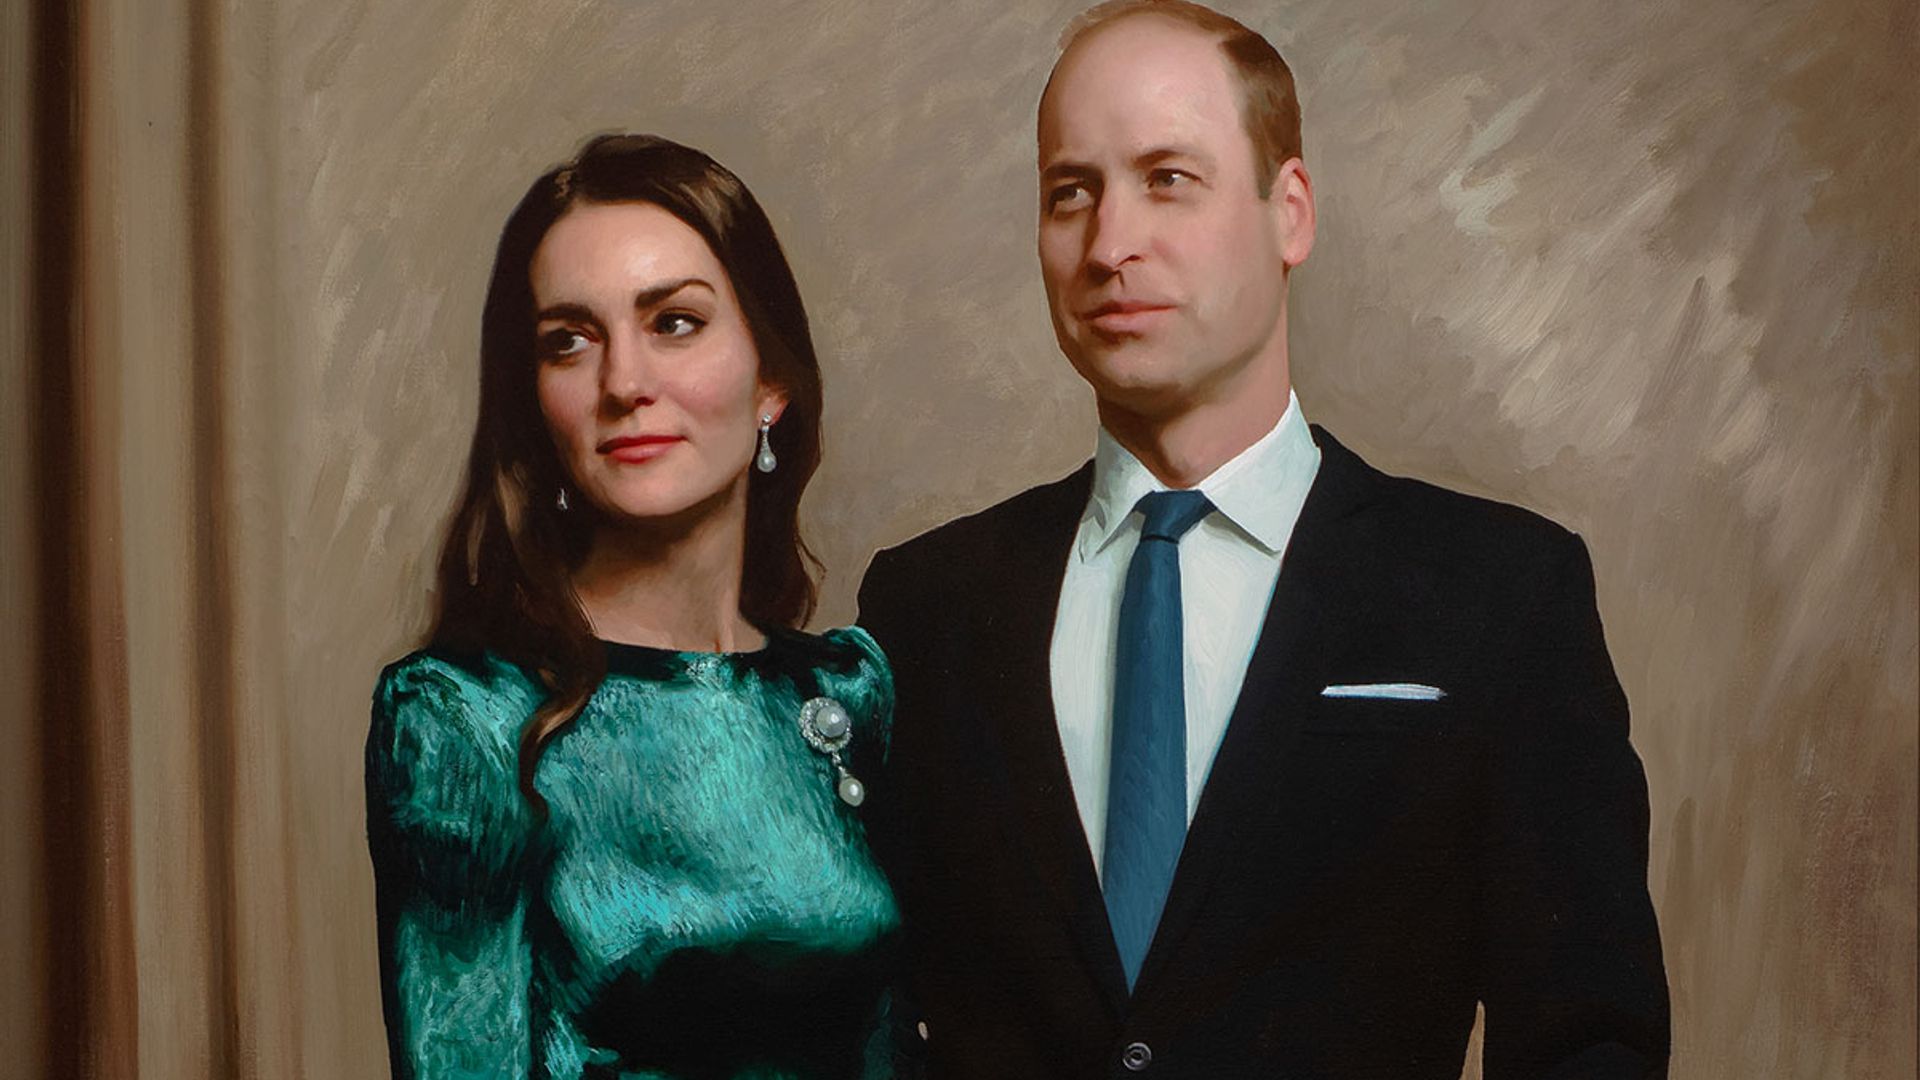 Prince William and Kate dazzle in stunning new portrait unveiled during Cambridgeshire outing